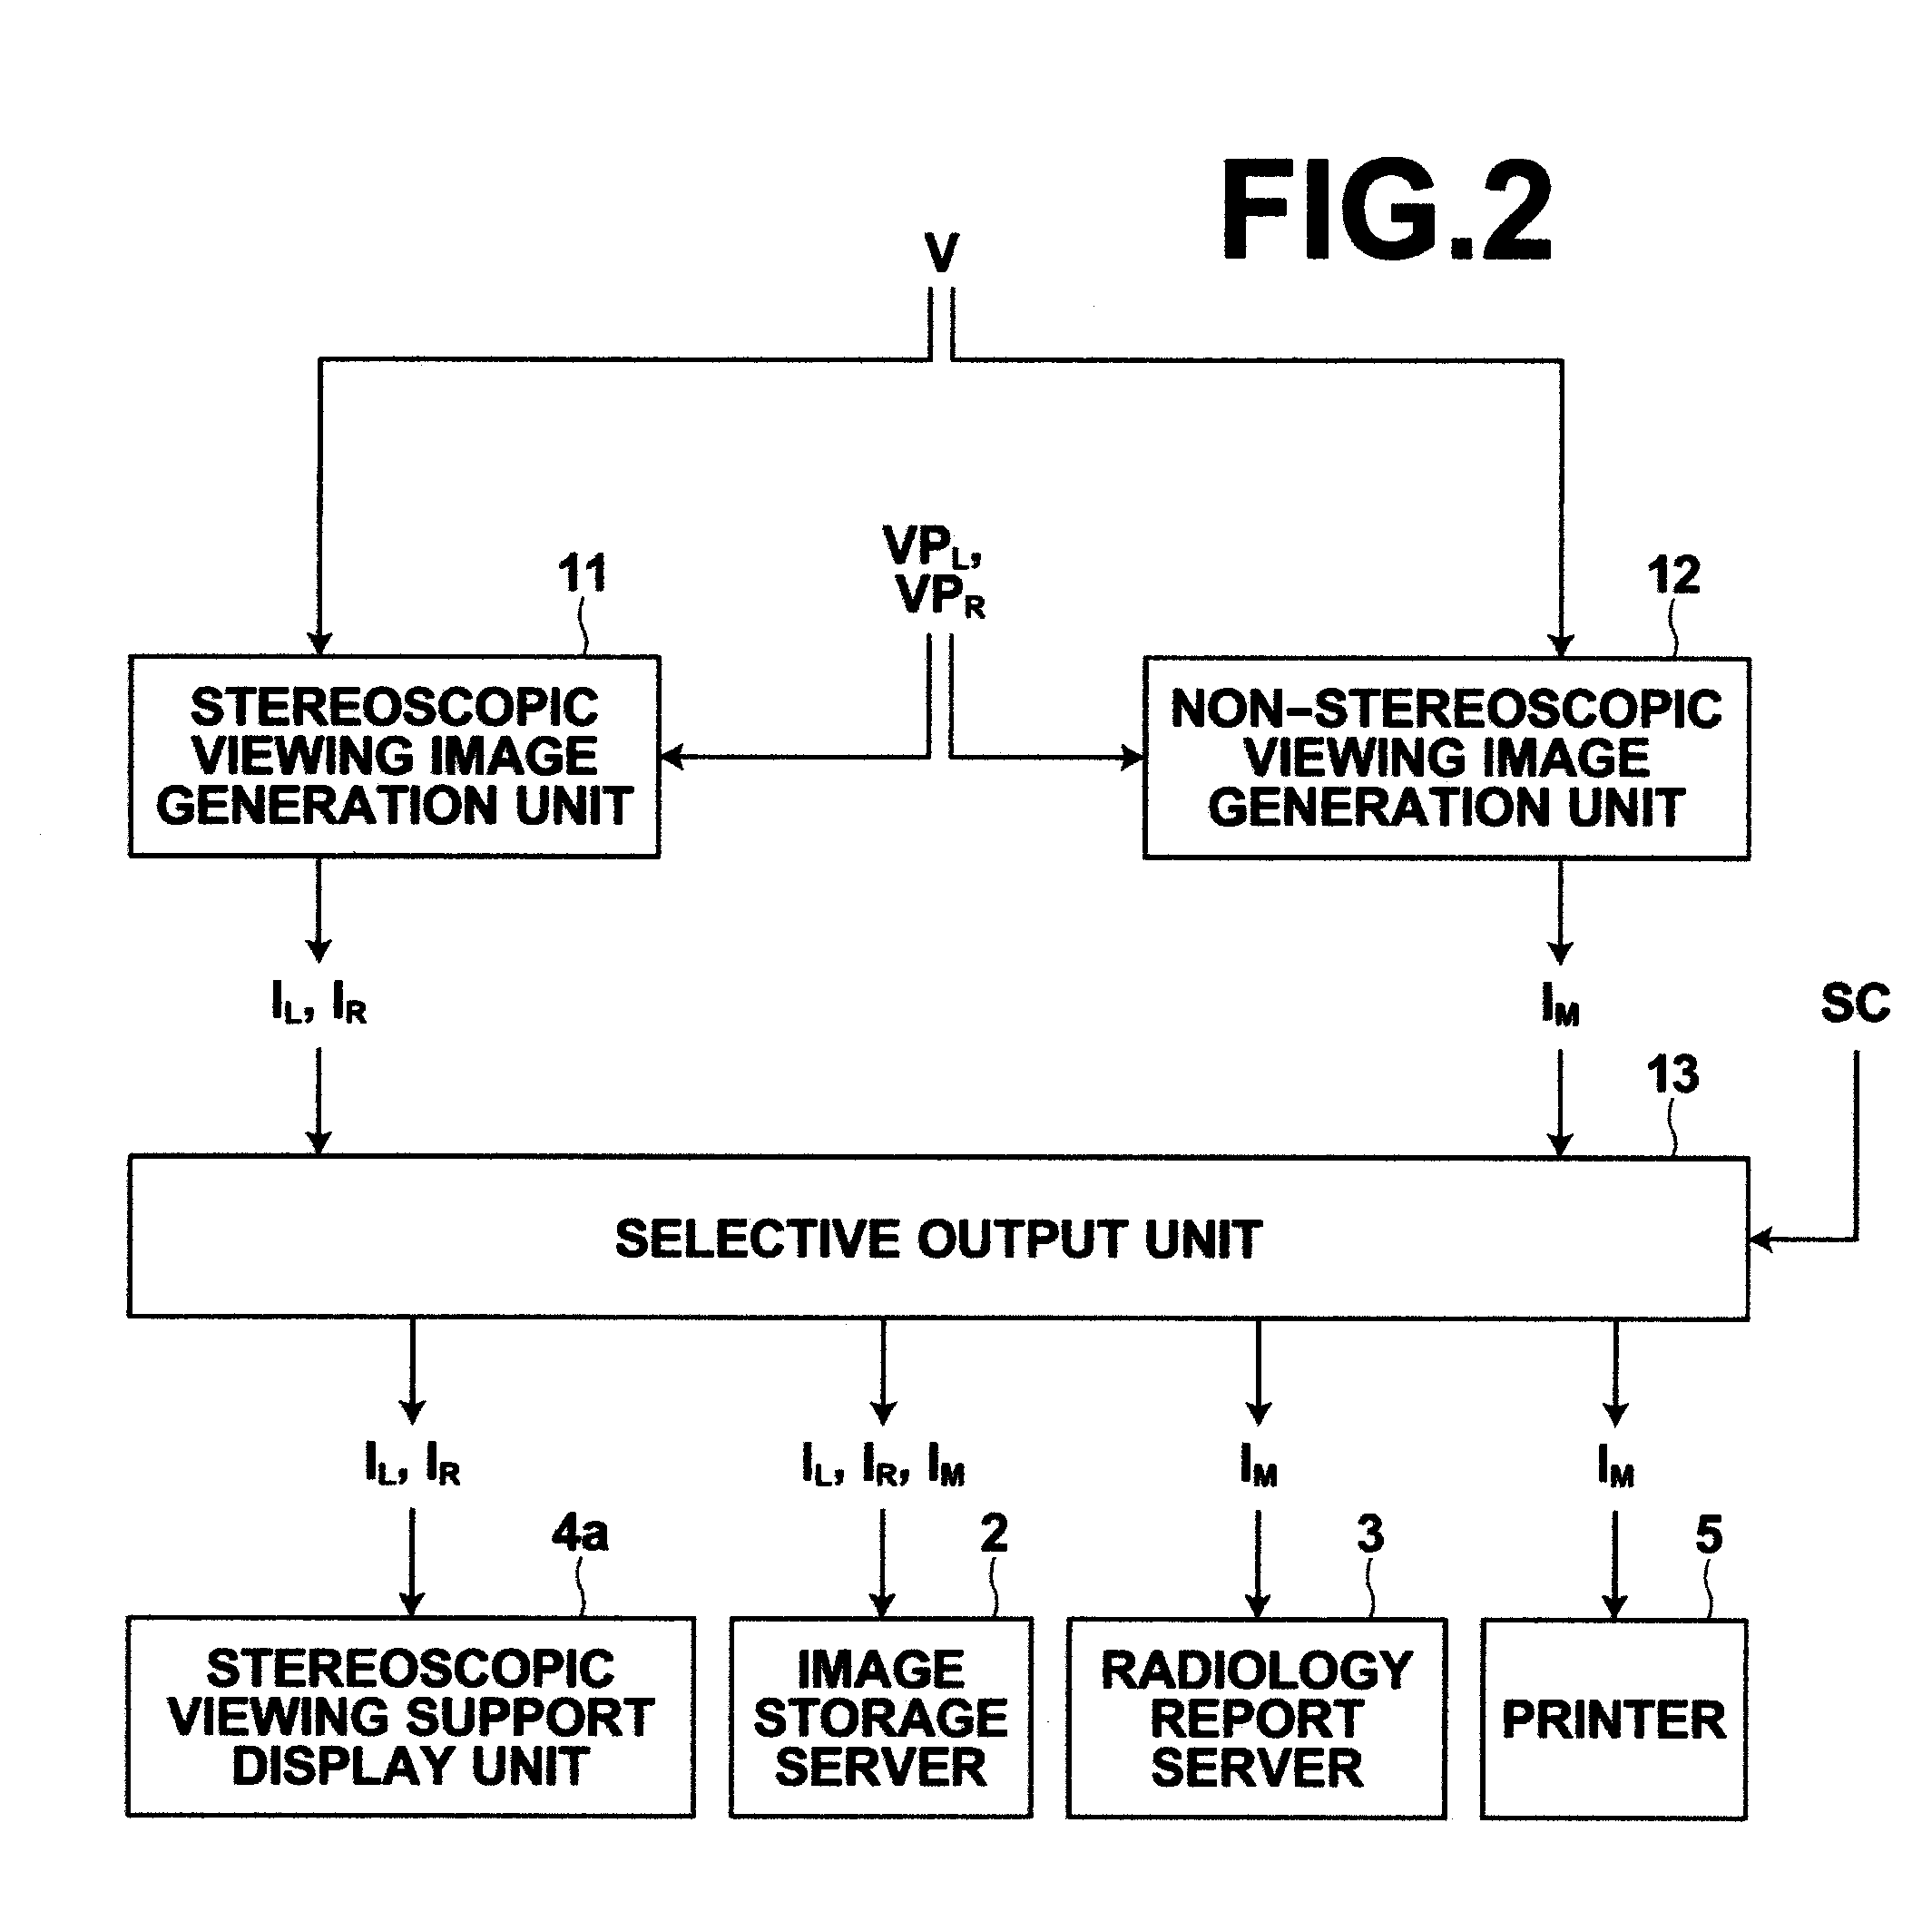 Apparatus and method for generating stereoscopic viewing image based on three-dimensional medical image, and a computer readable recording medium on which is recorded a program for the same